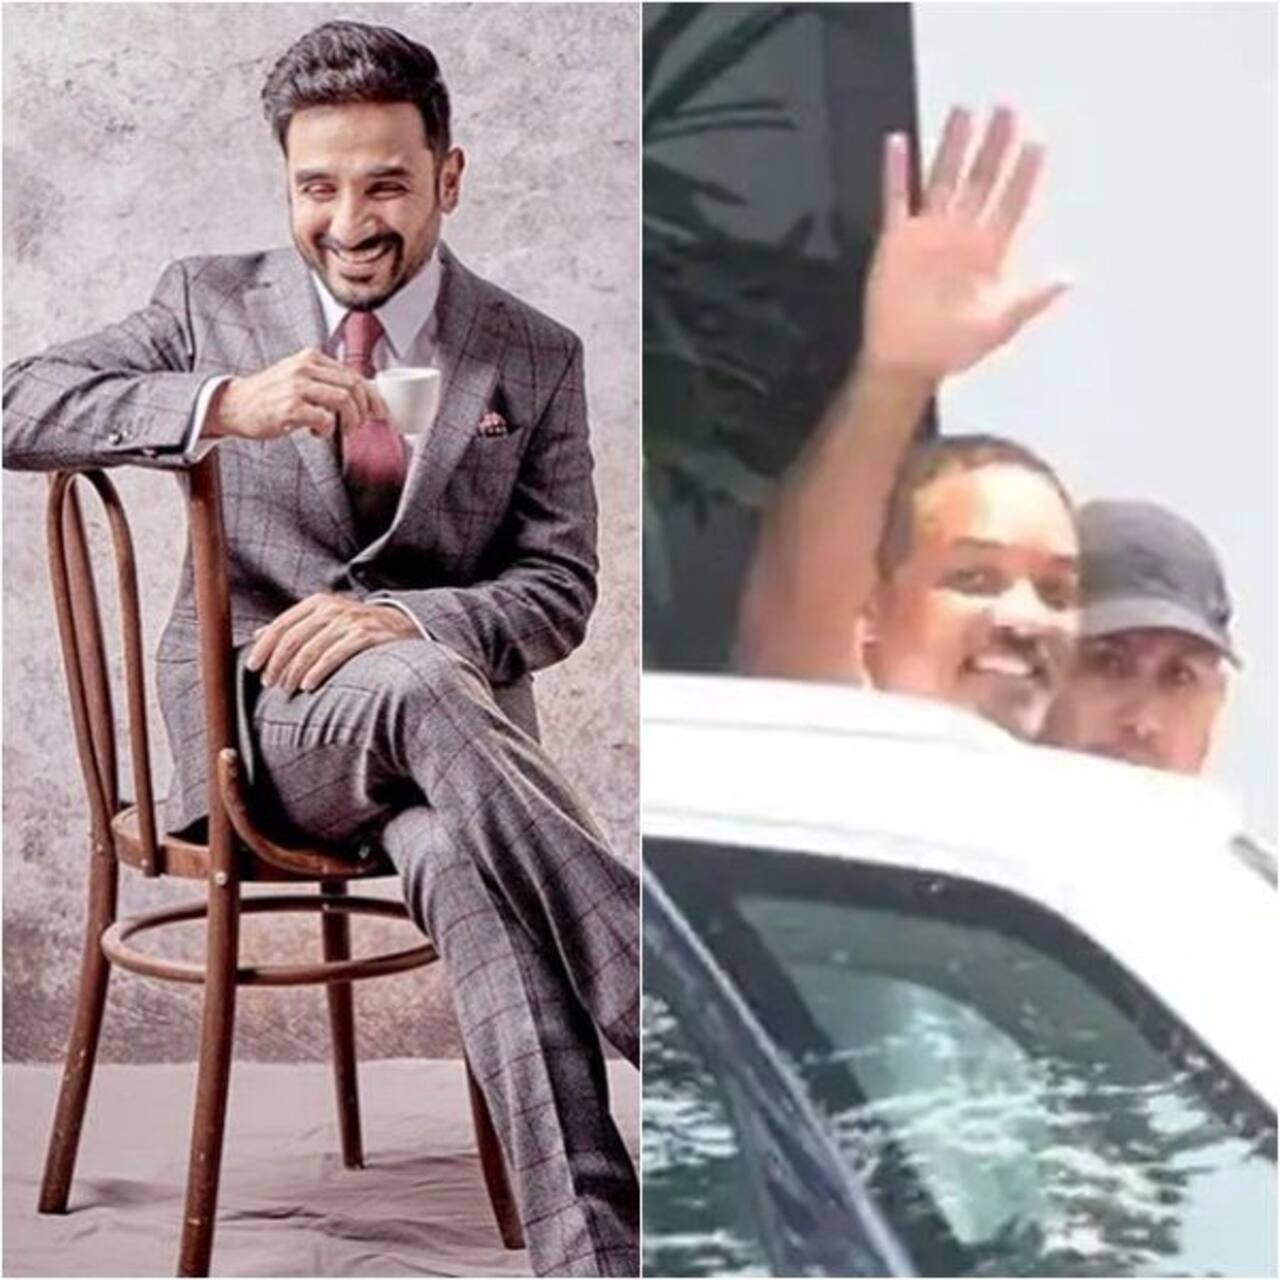 Vir Das takes a satirical dig at Will Smith's visit to India after Oscars slapgate: 'He can learn to slap comedians with legal cases'